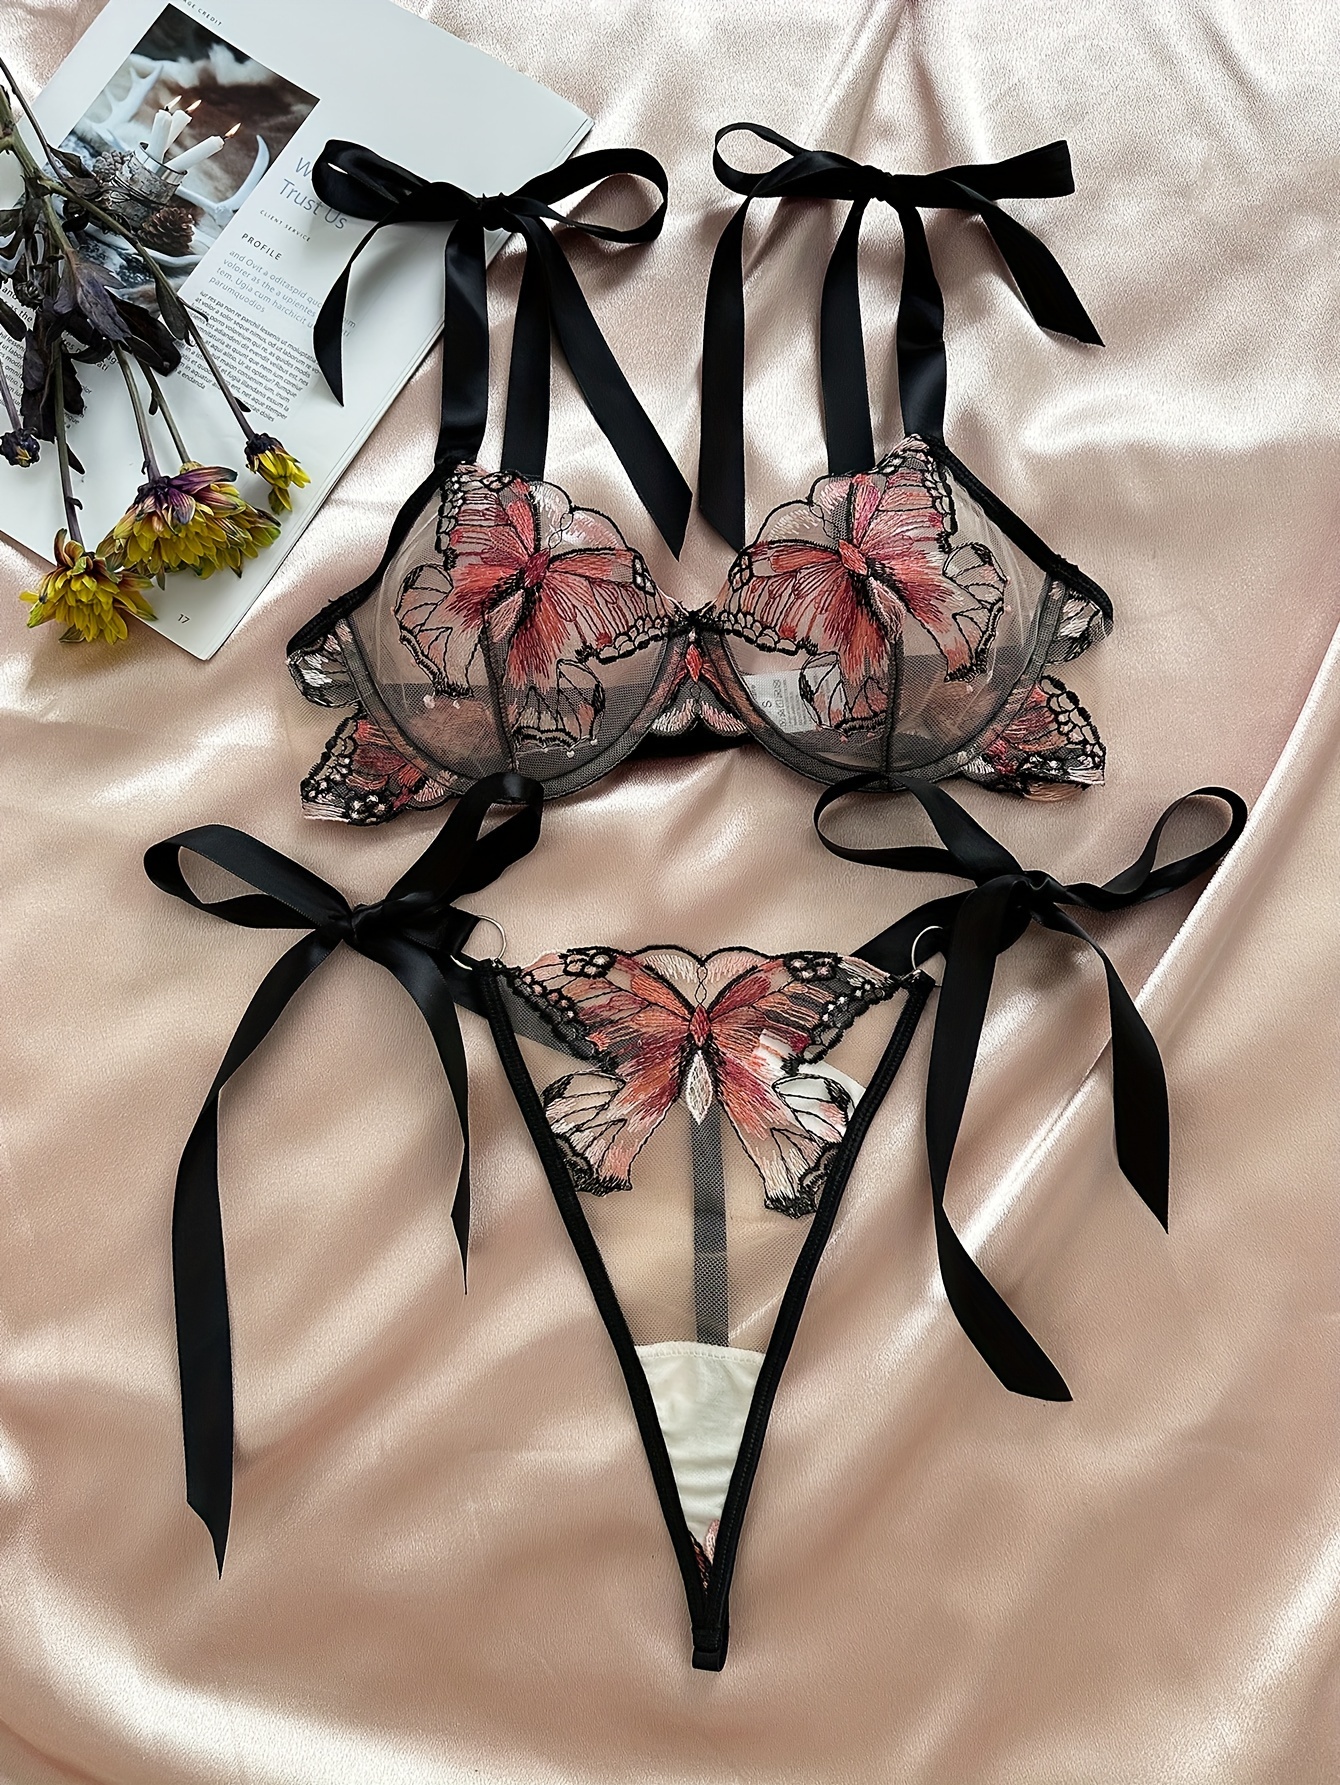 TTV Women's hot Mesh Lingerie Set Strappy Bow Lace Embroidered